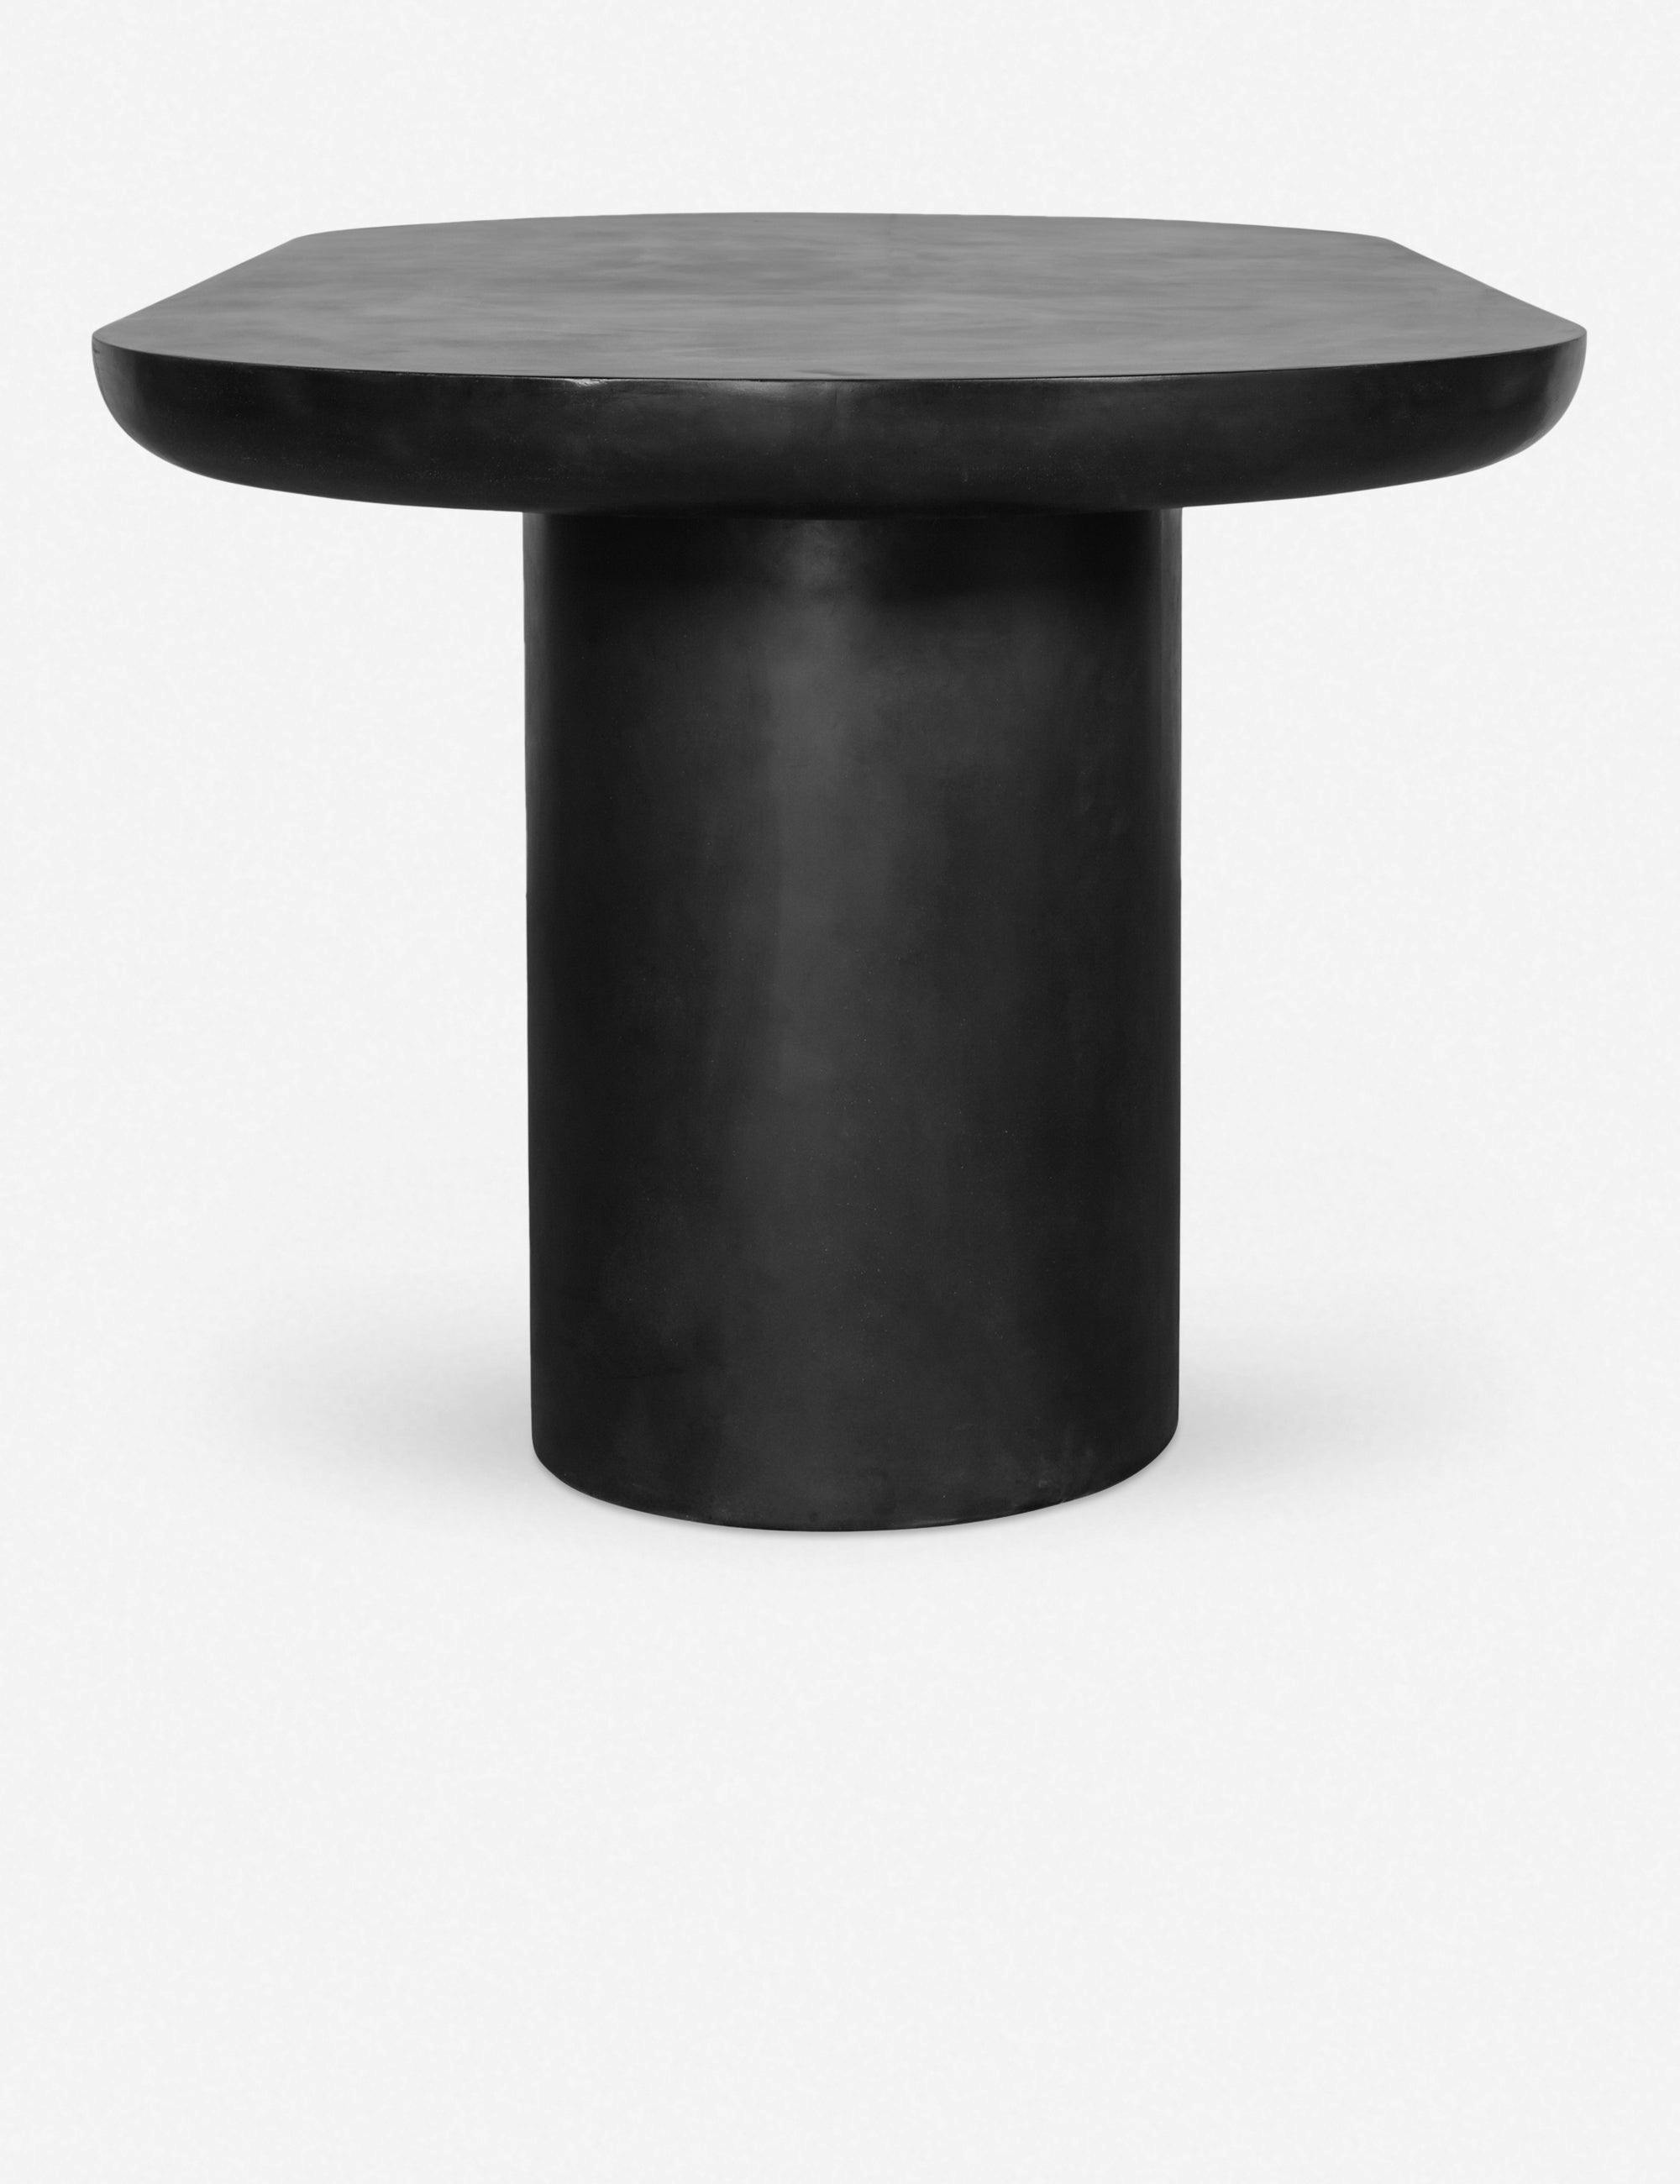 Rocca Black Fiber-Reinforced Concrete 6-Seater Oval Dining Table